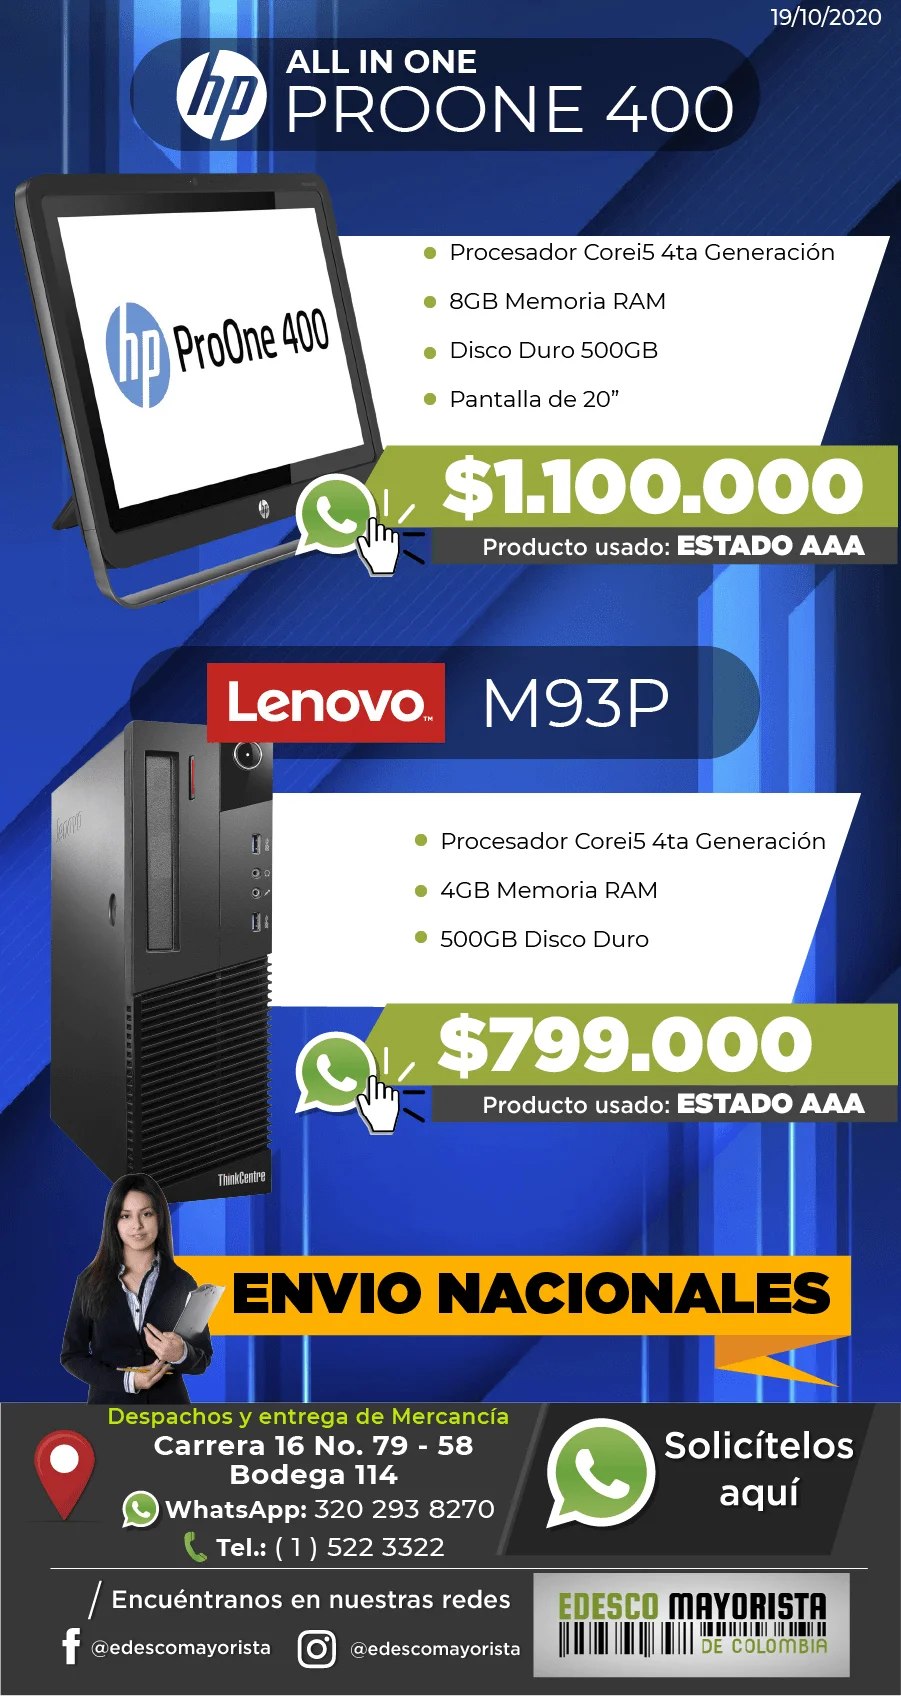 All In One HP ProOne 400 - Lenovo M93P